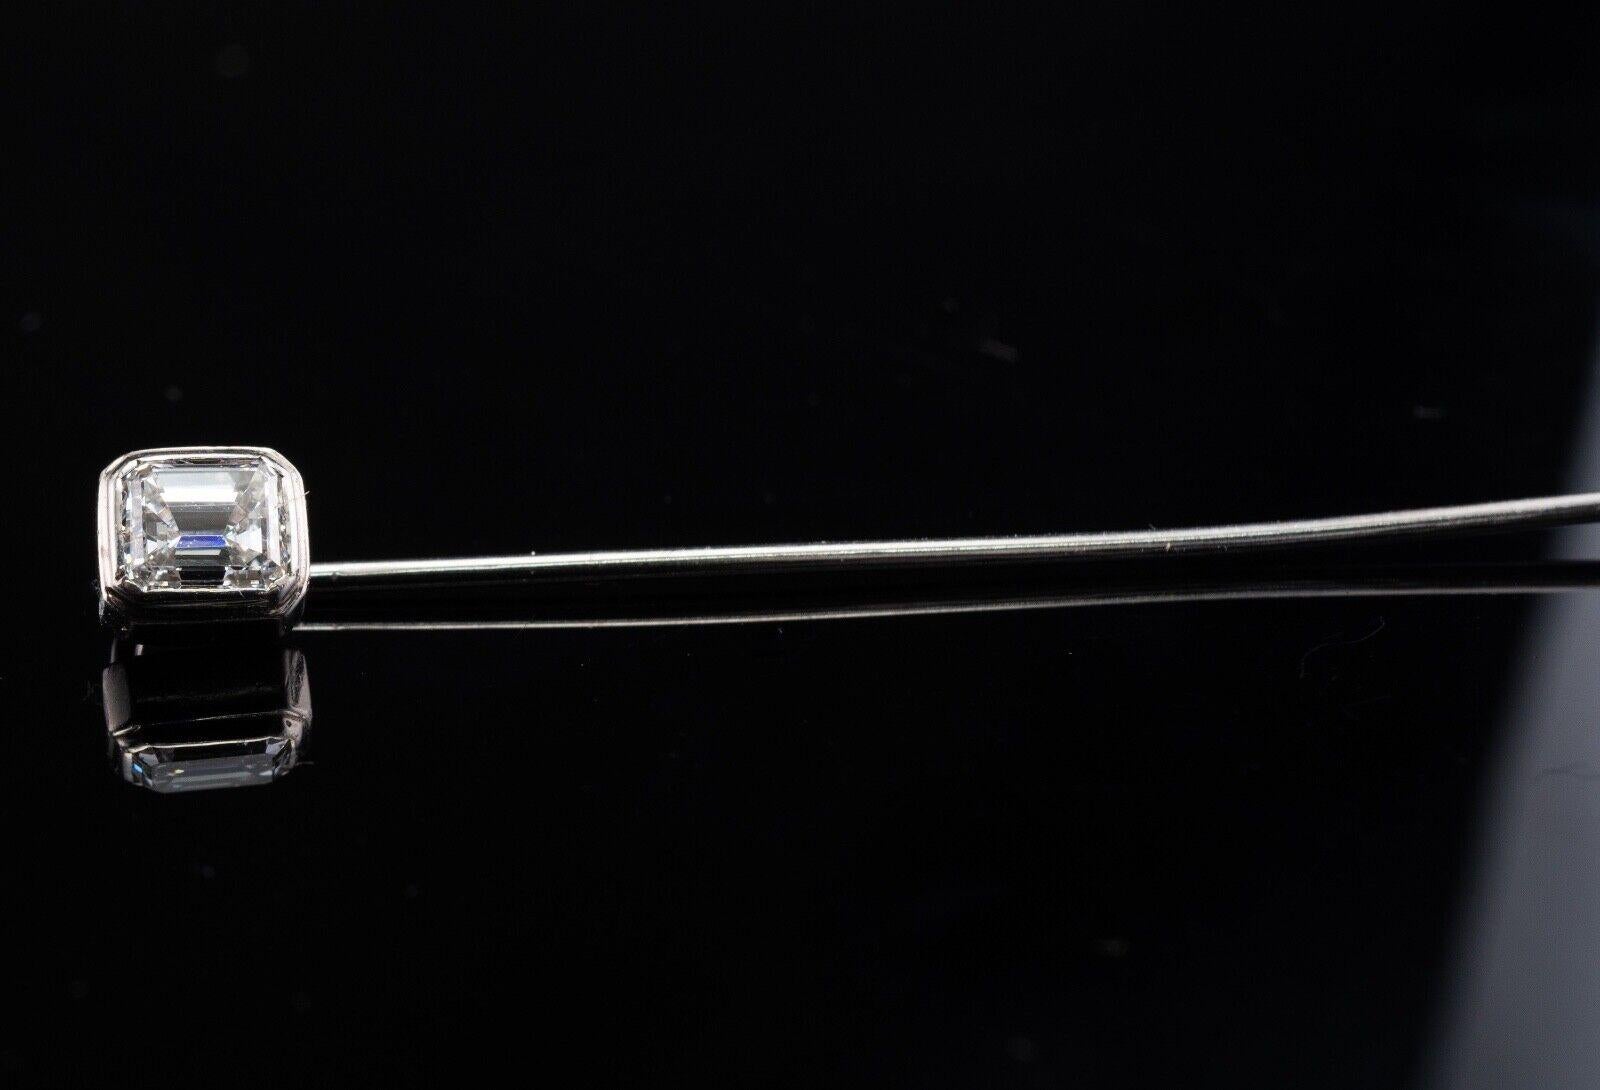 Natural Diamond Pin Stick .50 ct Platinum Vintage

This gorgeous vintage pin is crafted in solid Platinum (carefully tested and guaranteed)
The emerald cut diamond is .50 carat of amazing VVS1 clarity and F color!
The pin is 2.25